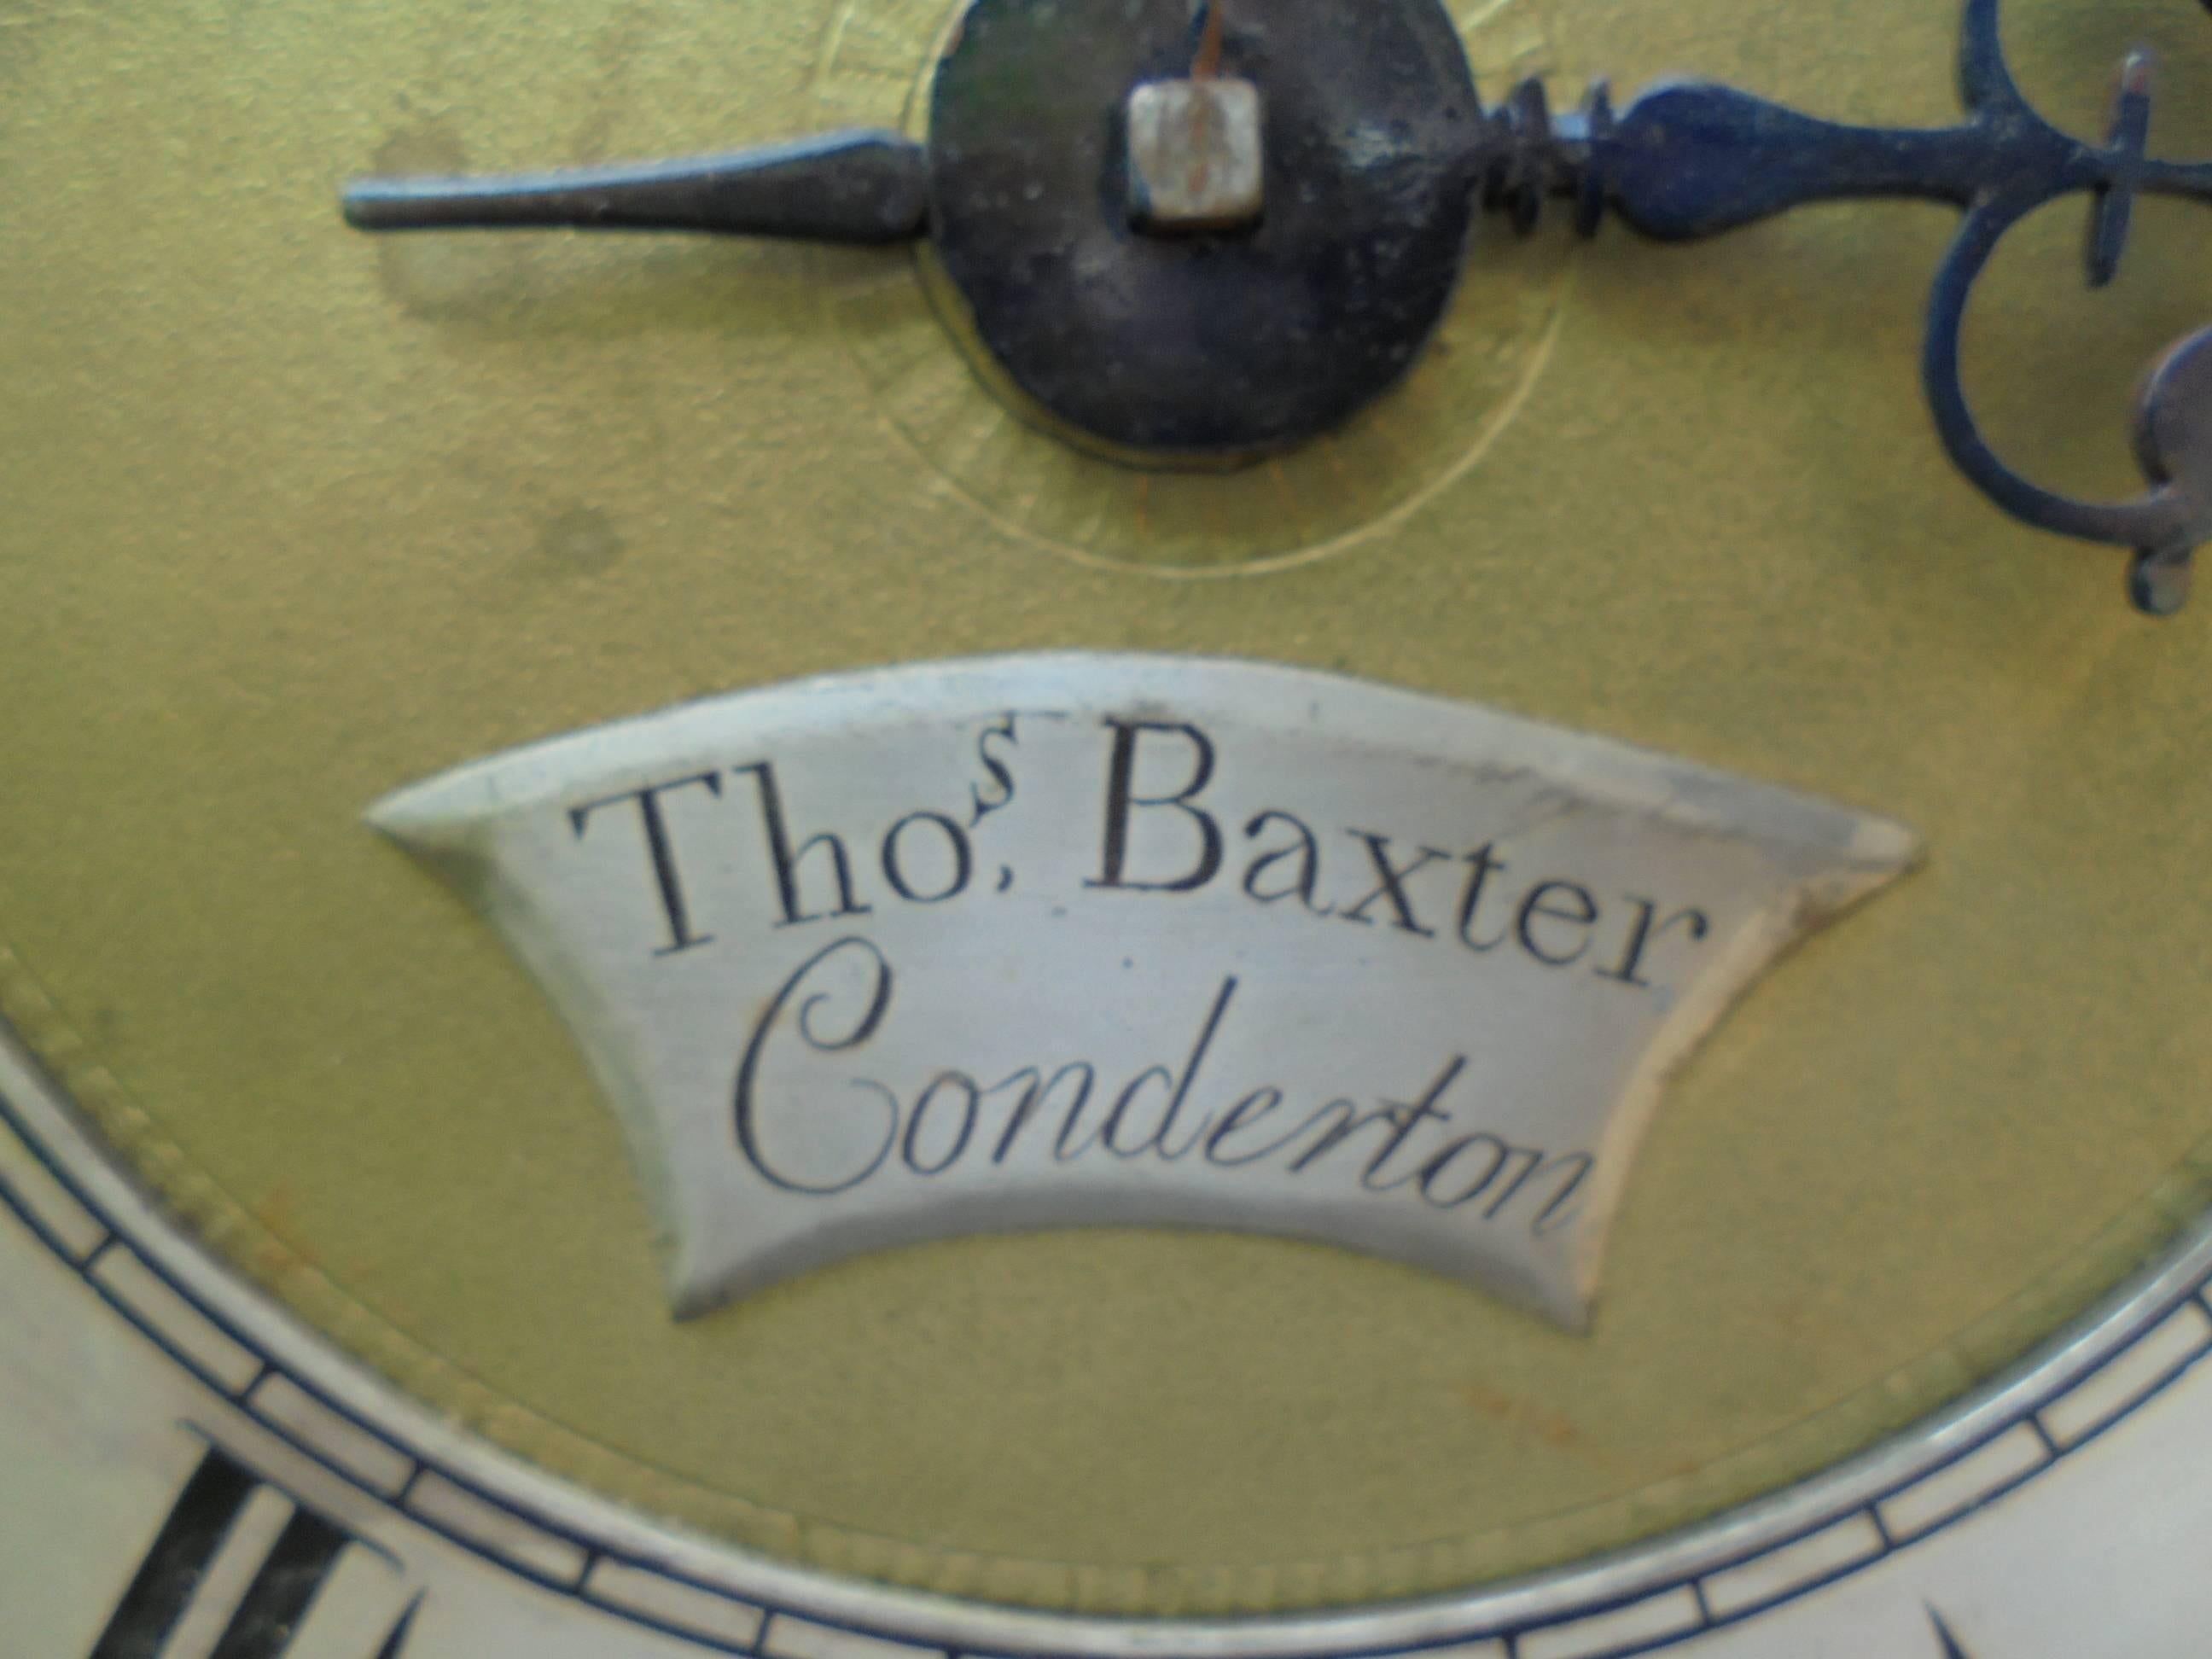 Offered for sale is this early antique hook and spike wall clock

Brass dial signed Thomas Baxter Condereton. It has a bob pendulum and single weight. The works are very dusty and dirty so will require a clean and service. All the mechanics are